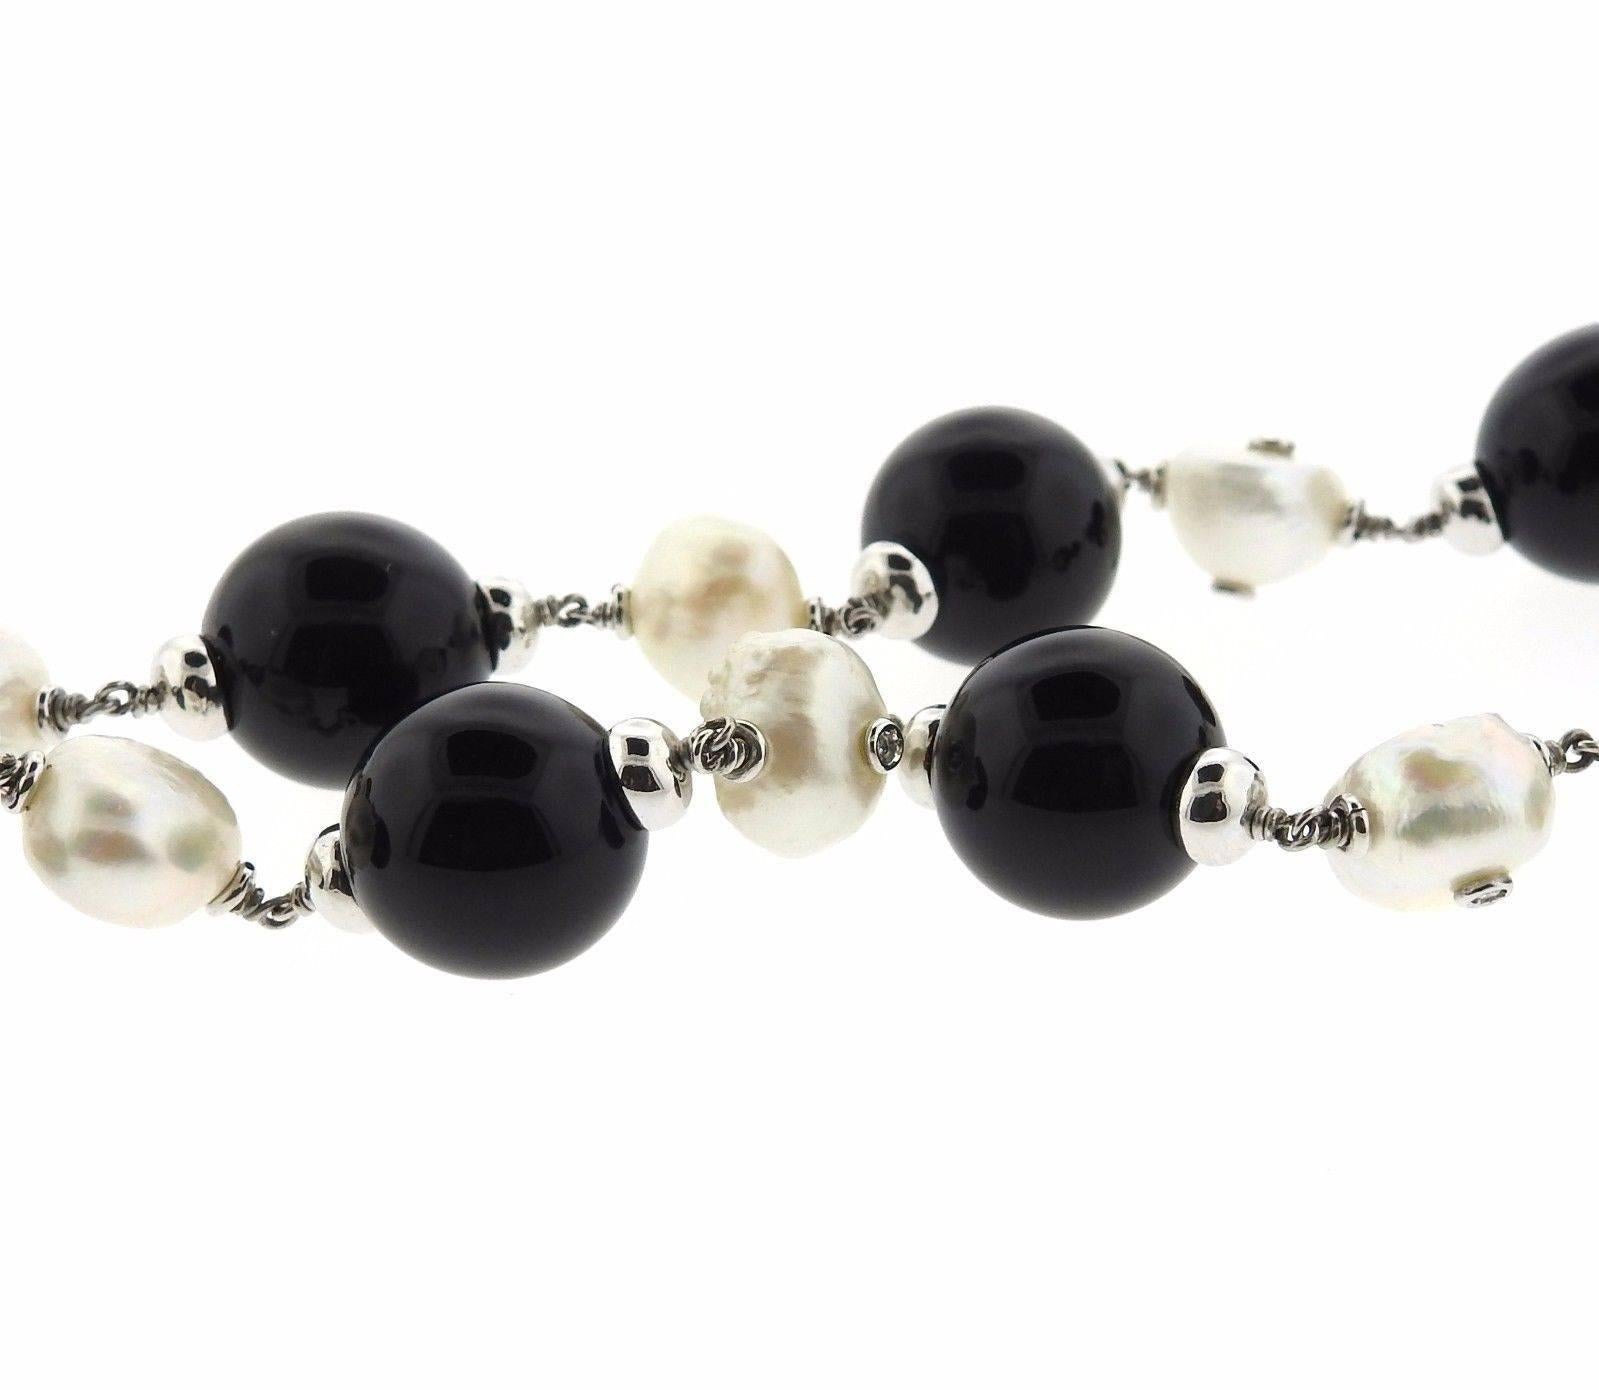 Lovely 18k gold necklace featuring onyx bead measuring 14mm in diameter, pearl beads measuring 11mm X 8.5 and 0.20ctw in diamonds. Necklace is adjustable up to 24" long, marked Made in Italy, Maker's mark, 18Kt. Weight is 84.7 grams. 